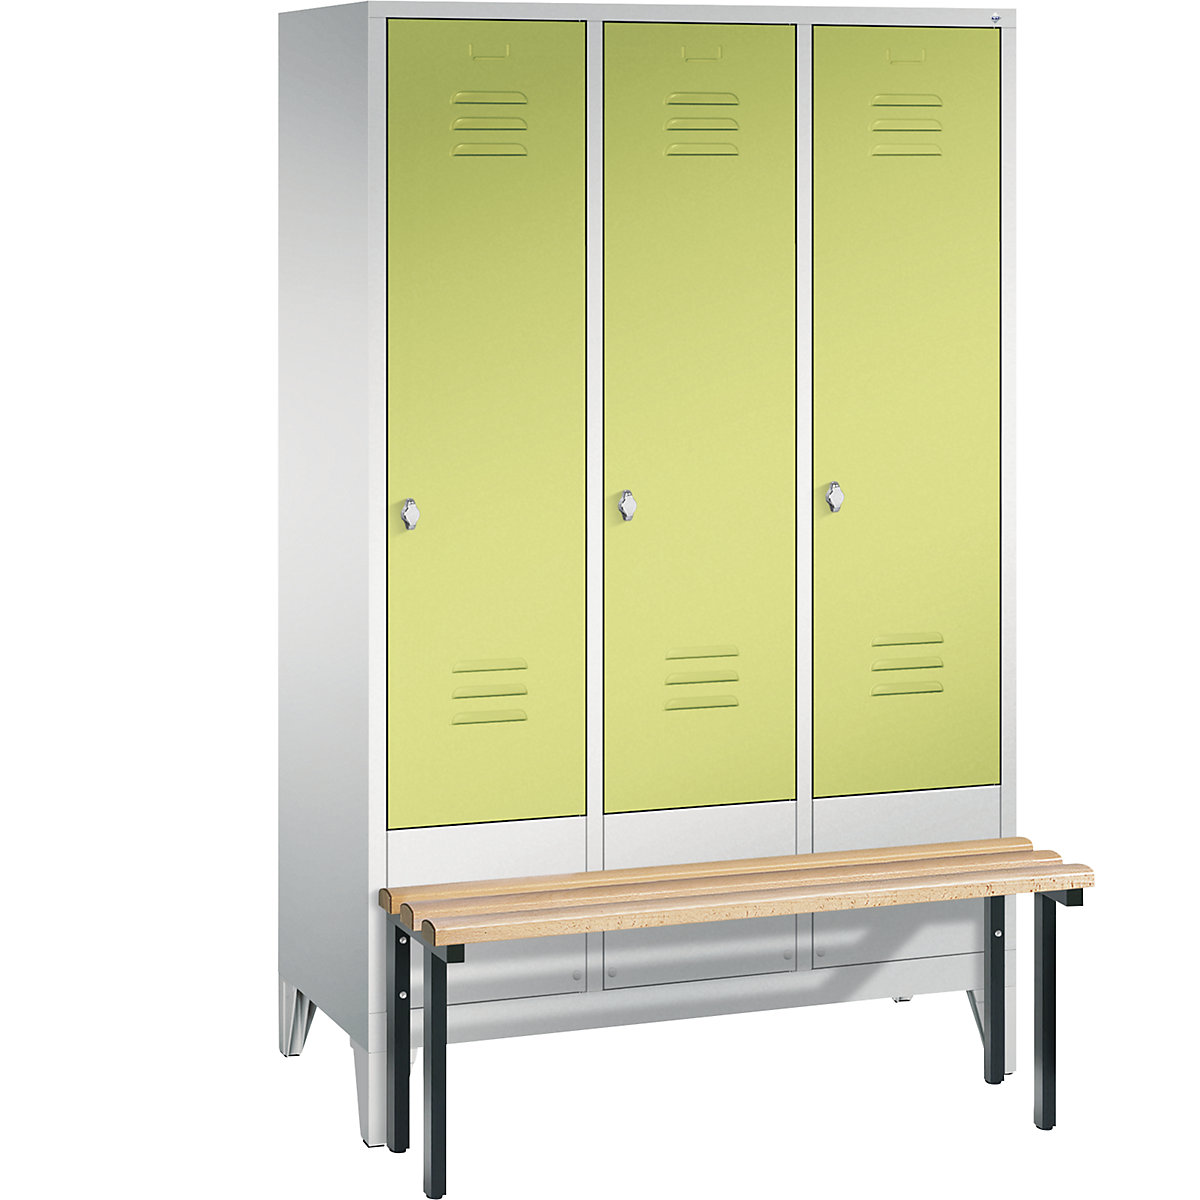 CLASSIC cloakroom locker with bench mounted in front – C+P, 3 compartments, compartment width 400 mm, light grey / viridian green-8